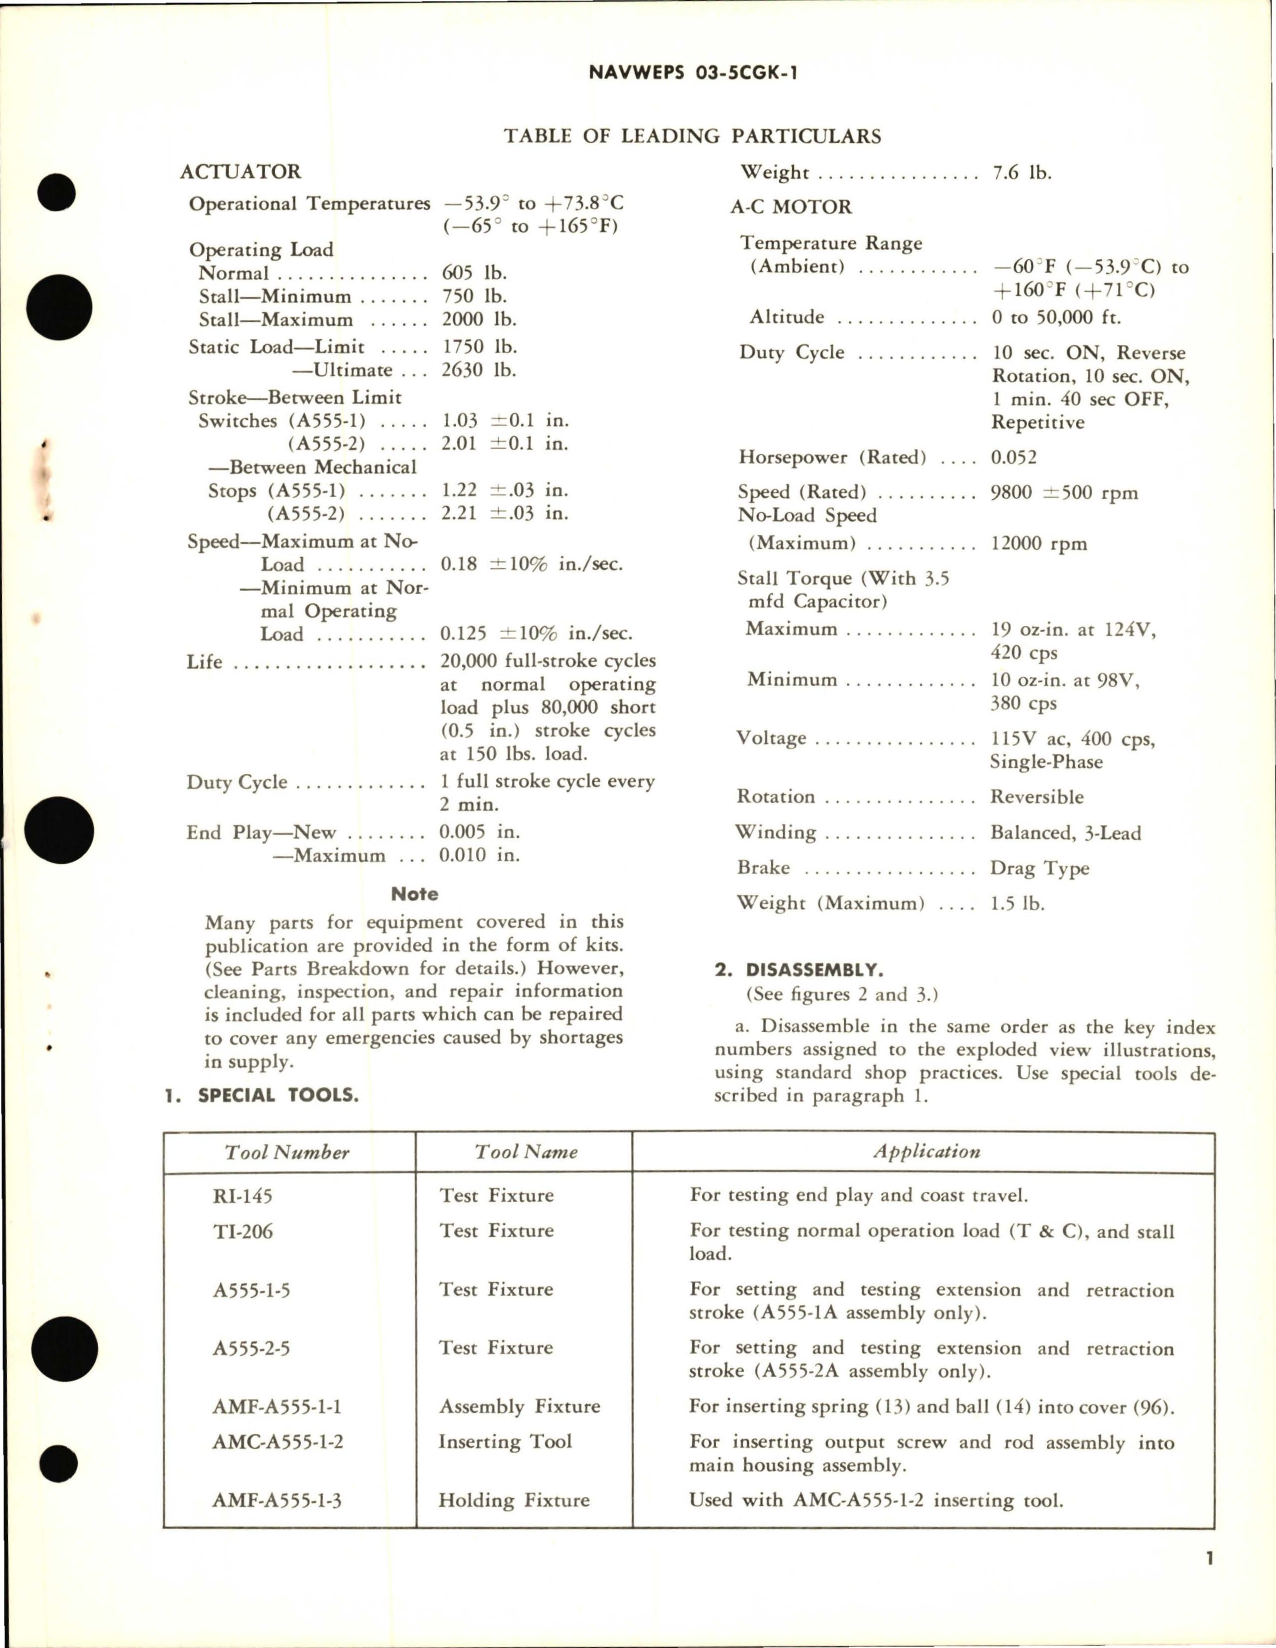 Sample page 5 from AirCorps Library document: Overhaul Instructions with Illustrated Parts Breakdown for Linear Actuator Assembly - Part A555-1A and A555-2A 